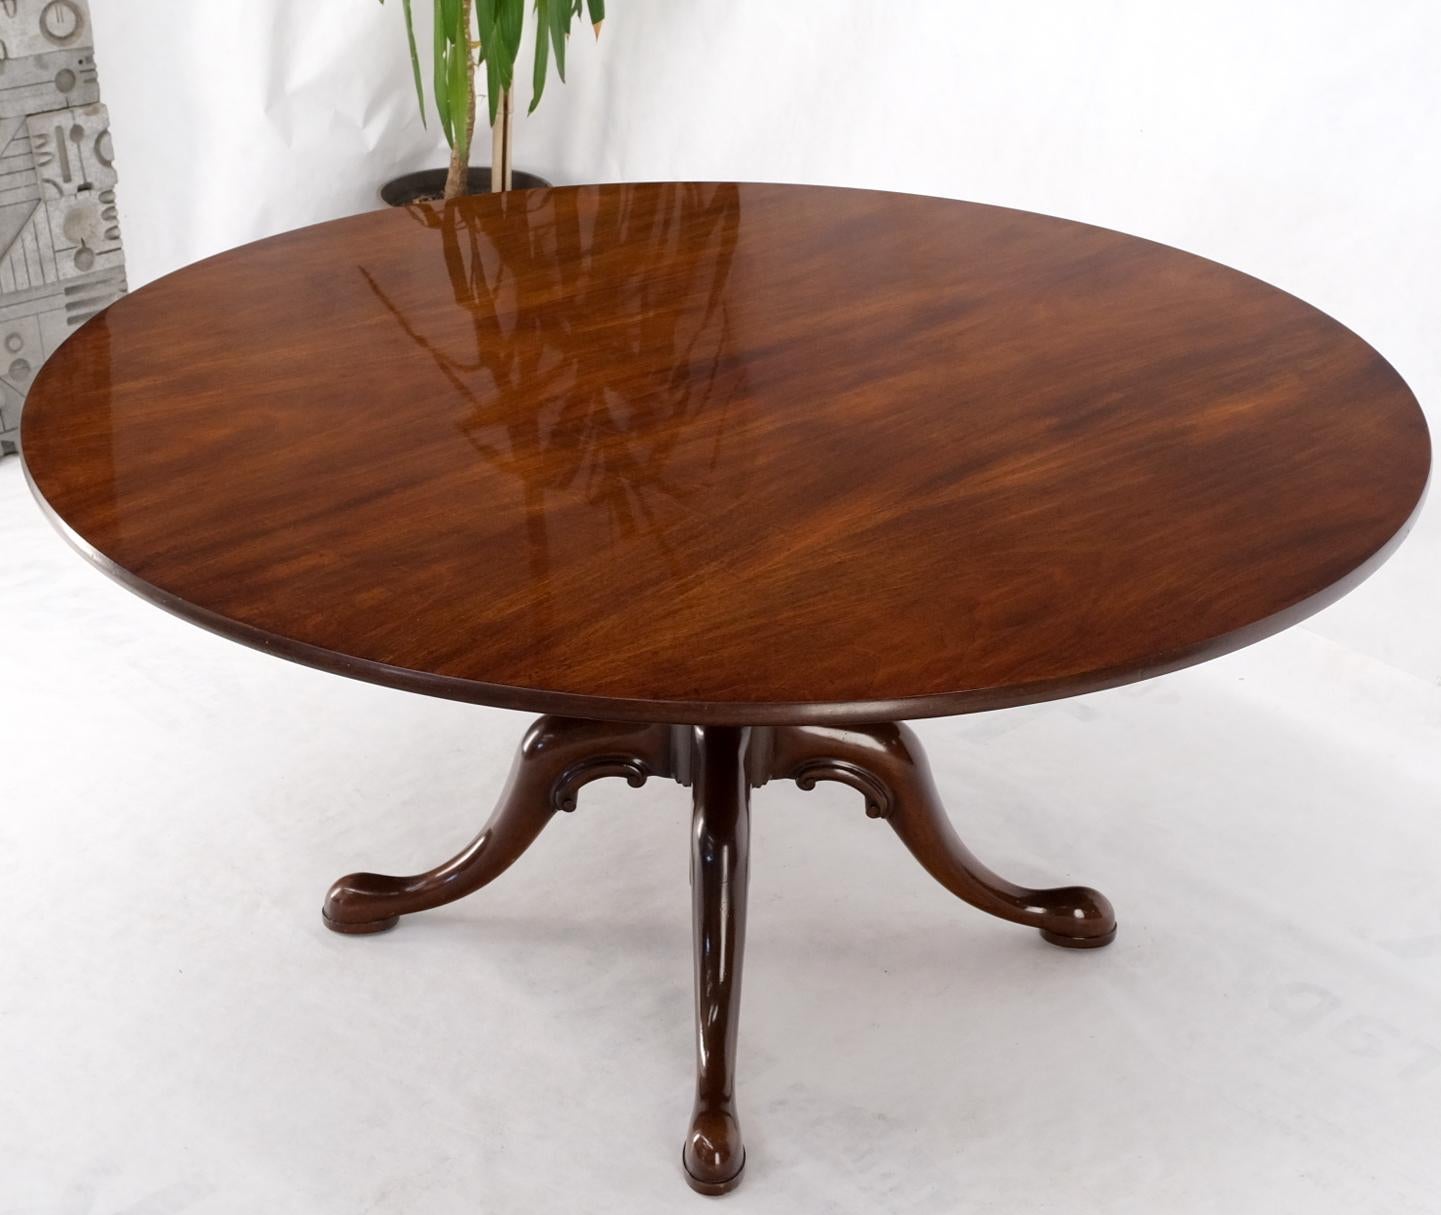 20th Century Large Round Solid Mahogany Dining Breakfast Table Removable Top